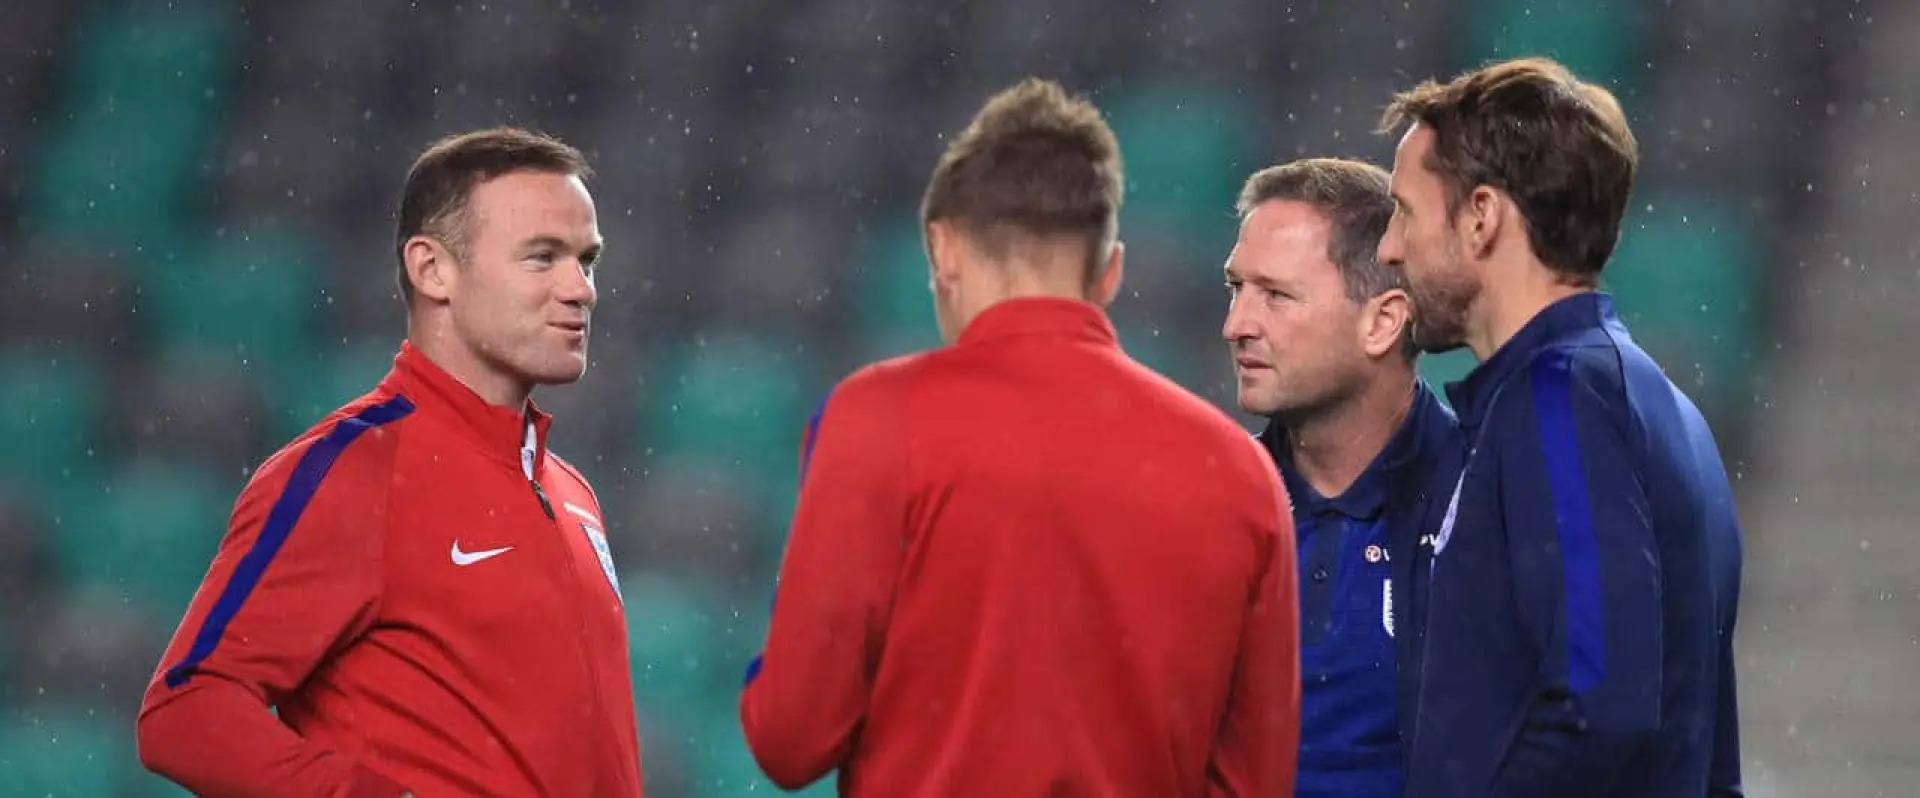 Coral offer Wayne Rooney specials and England captain odds after Gareth Southgate drops him.